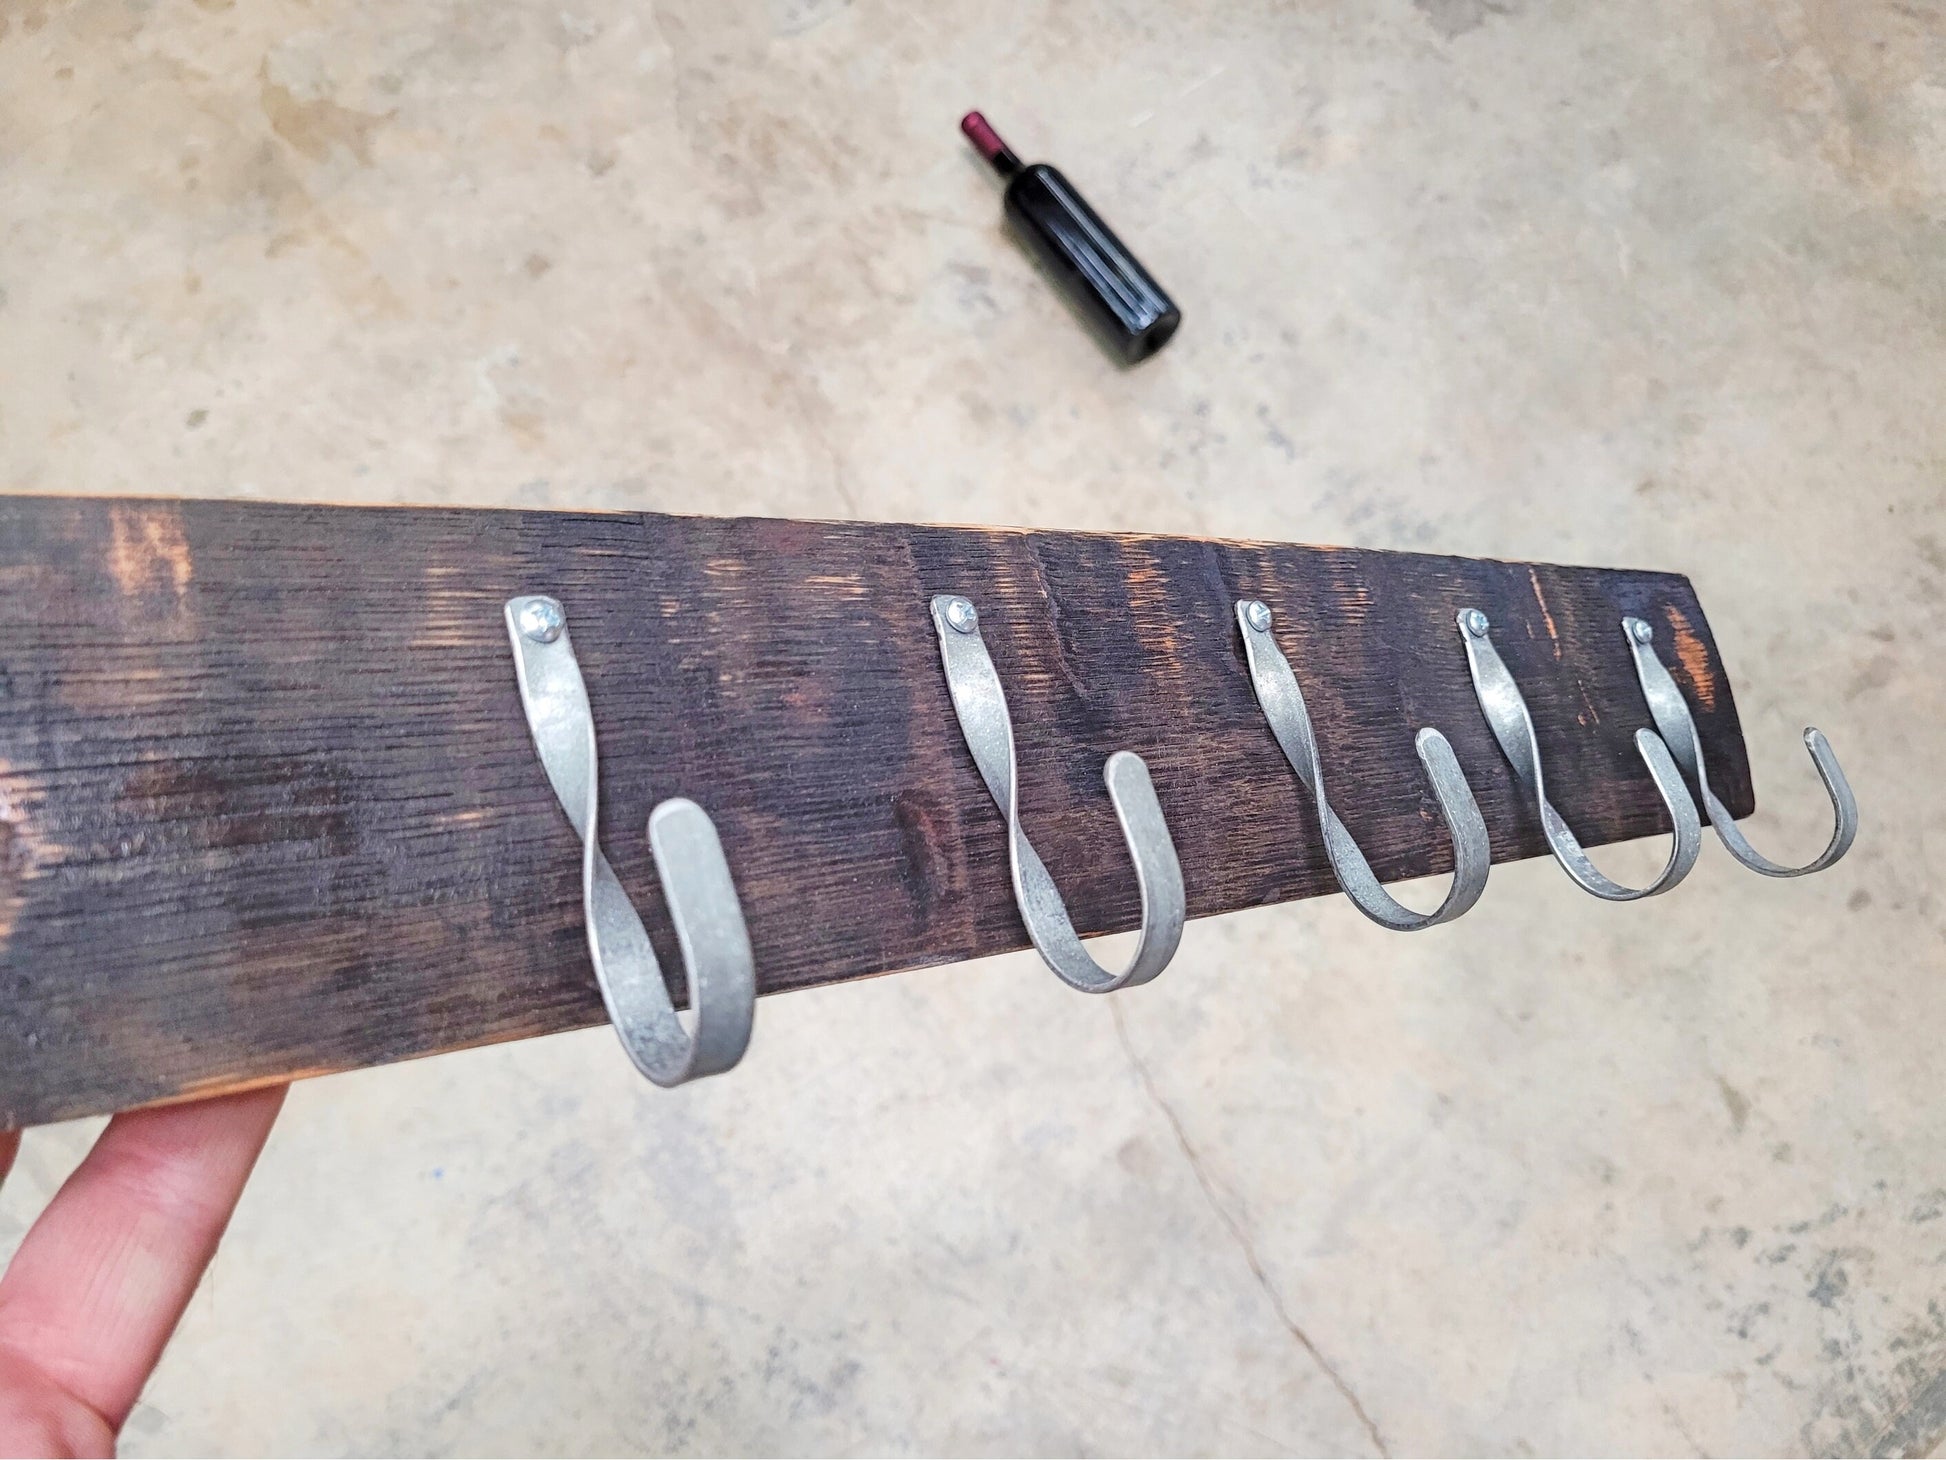 Whiskey Barrel Coat Rack - KUKA - Made from Premiere Retired Whisky Barrels 100% Recycled!